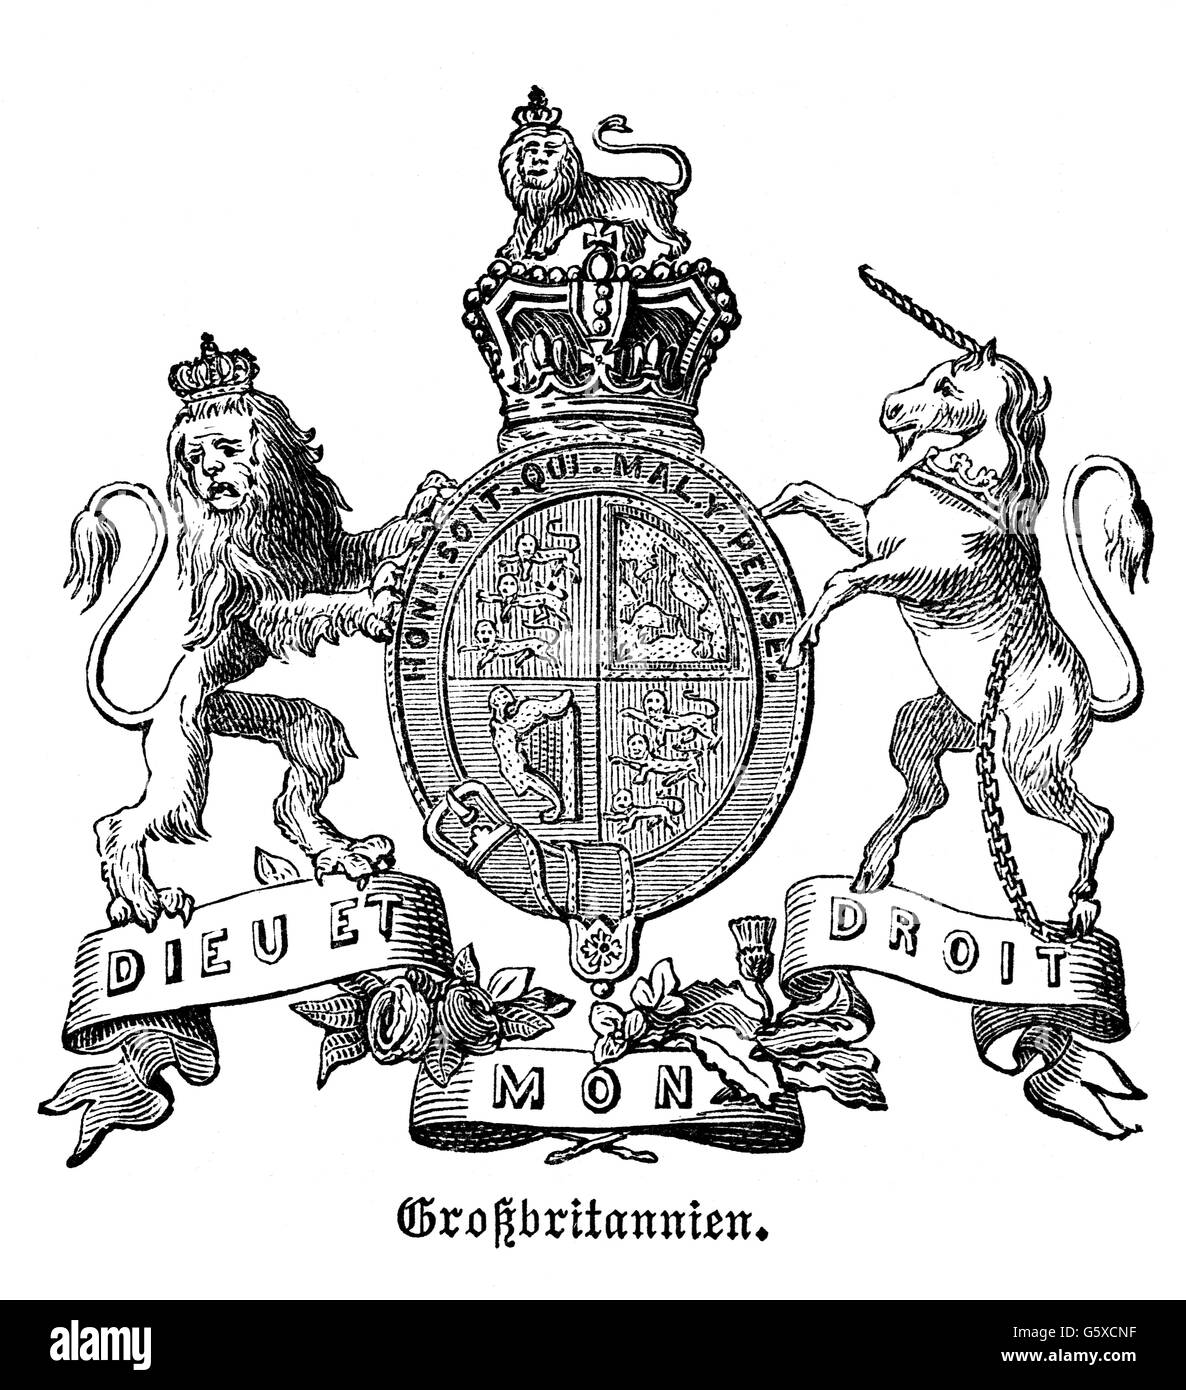 heraldry, coat of arms, Great Britain, state coat of arms of the Kingdom of Great Britain, wood engraving, 1872, Additional-Rights-Clearences-Not Available Stock Photo